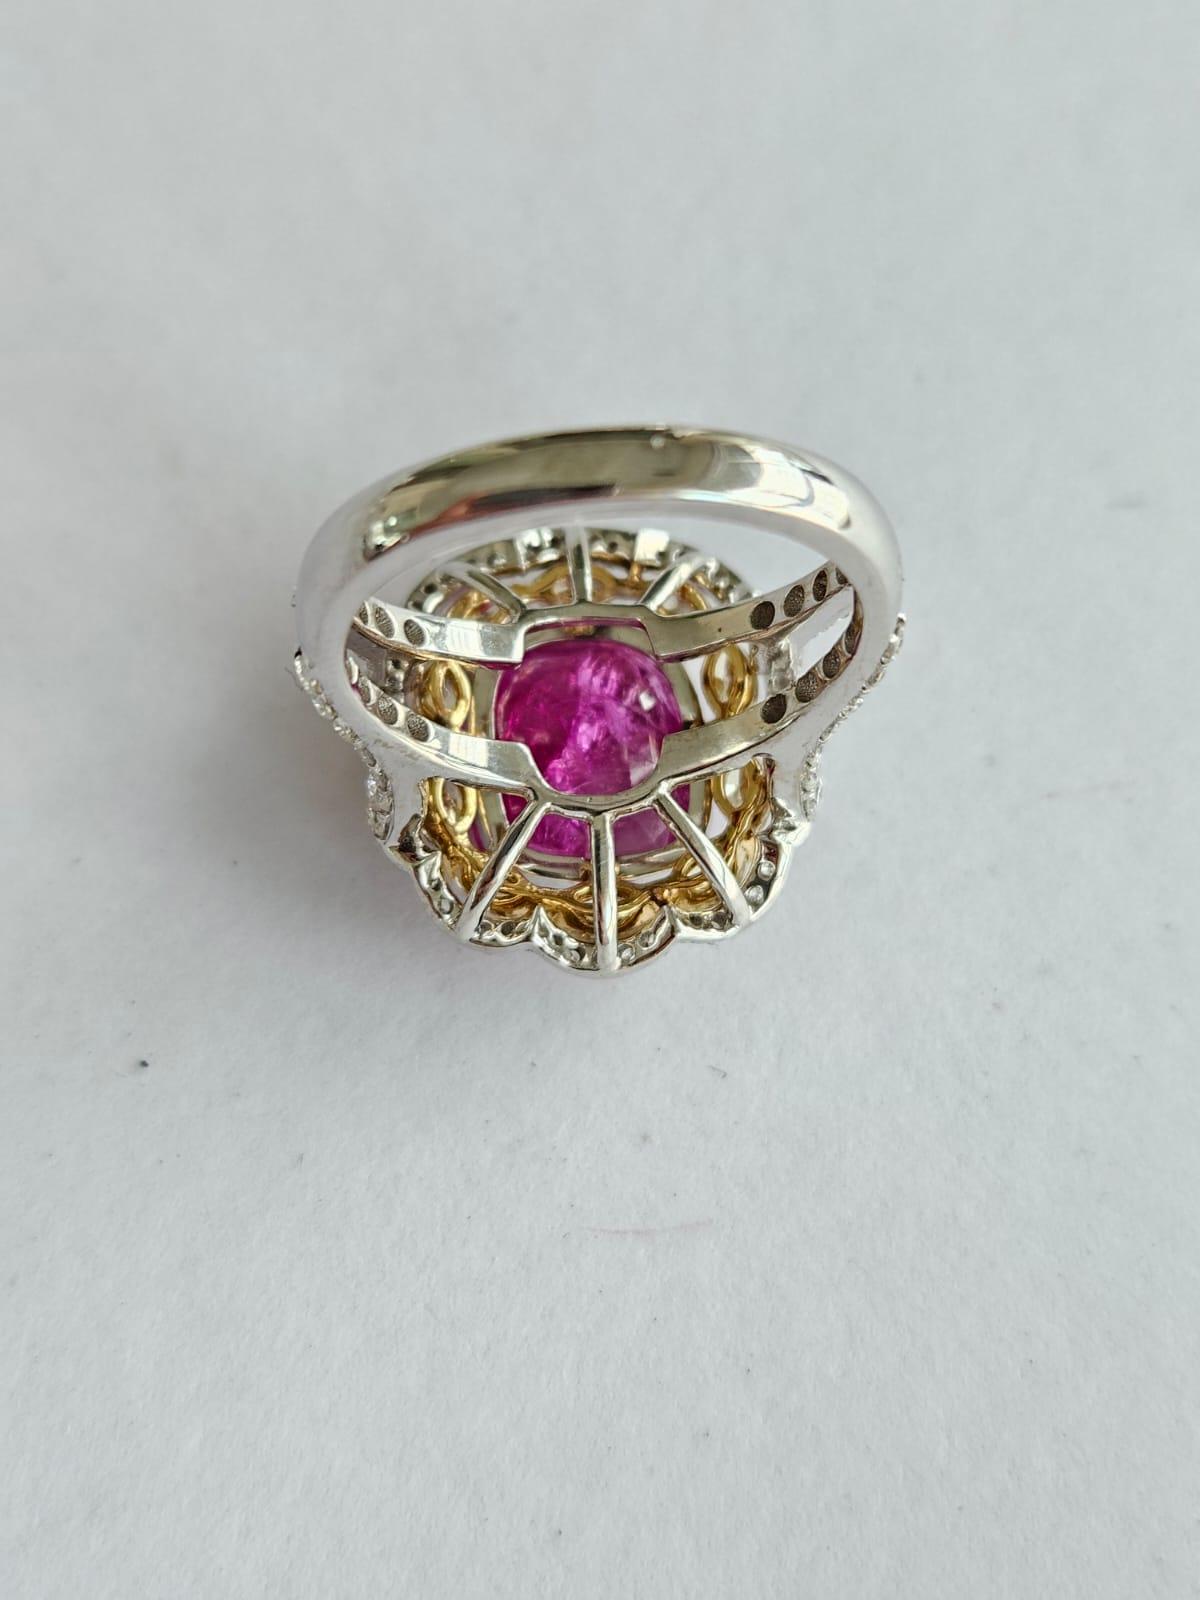 Modern GJEPC Certified 6.24 carats unheat natural Burma Ruby & Diamonds Engagement Ring For Sale